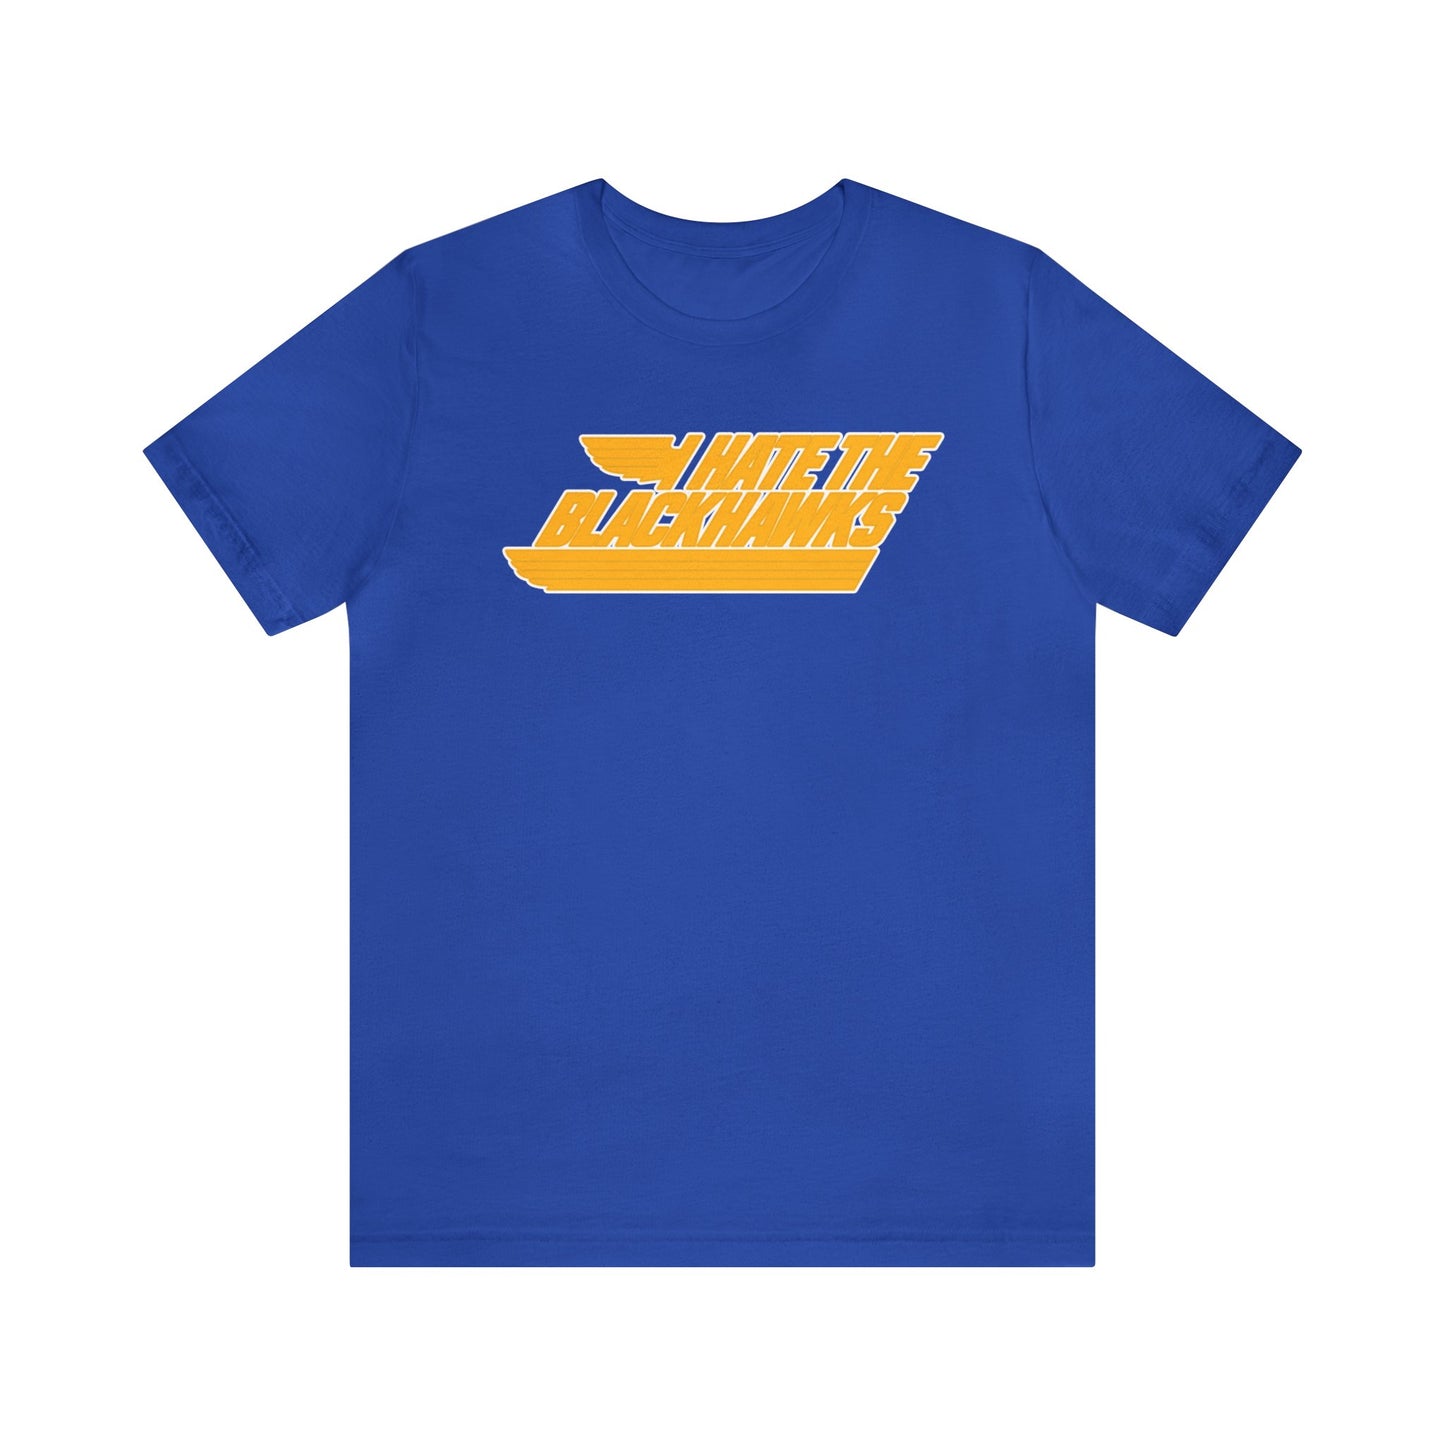 I Hate That Chicago Hockey Team (for St. Louis fans) - Unisex Jersey Short Sleeve Tee